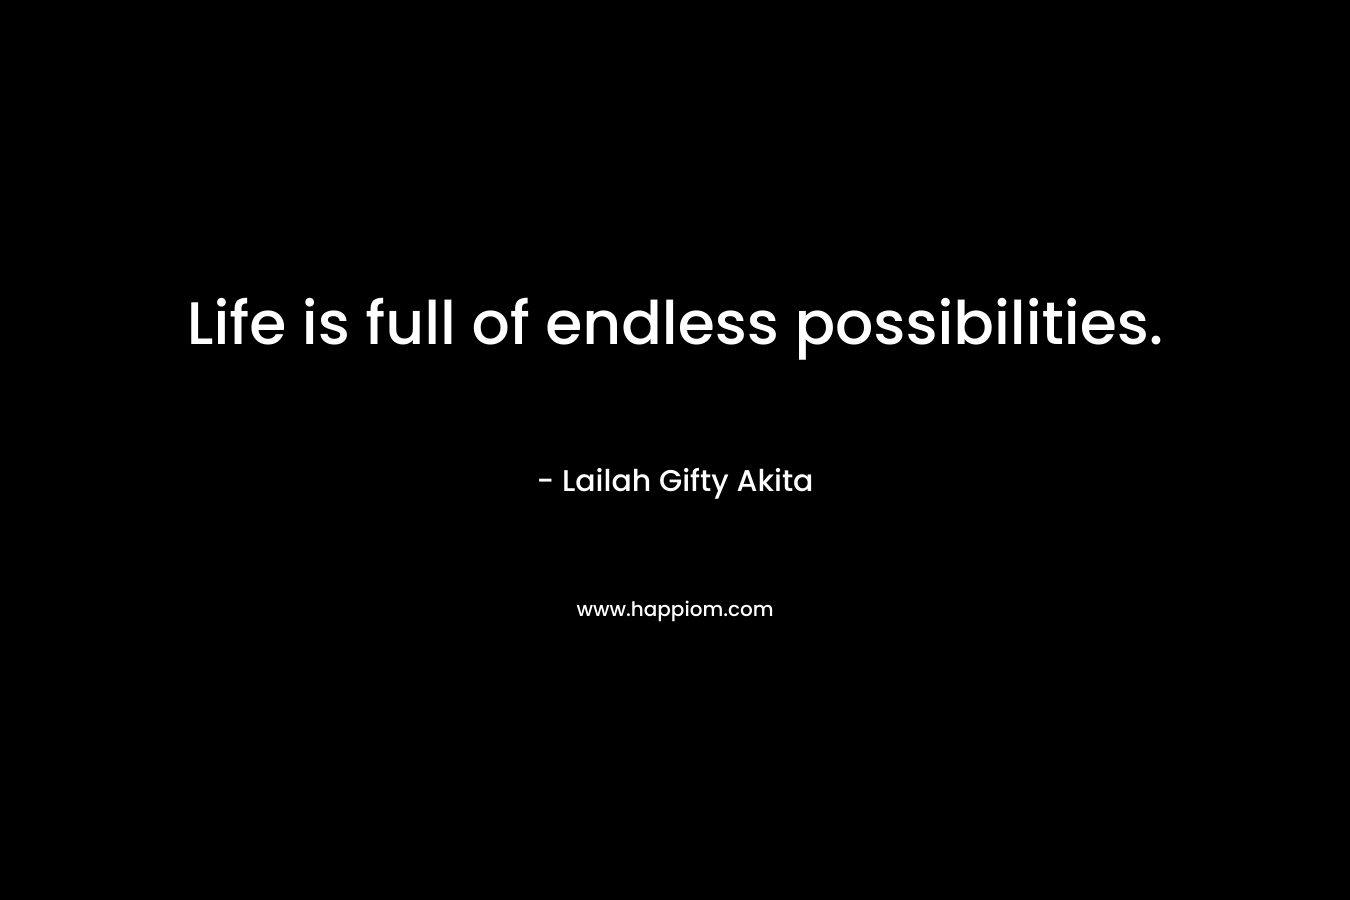 Life is full of endless possibilities.